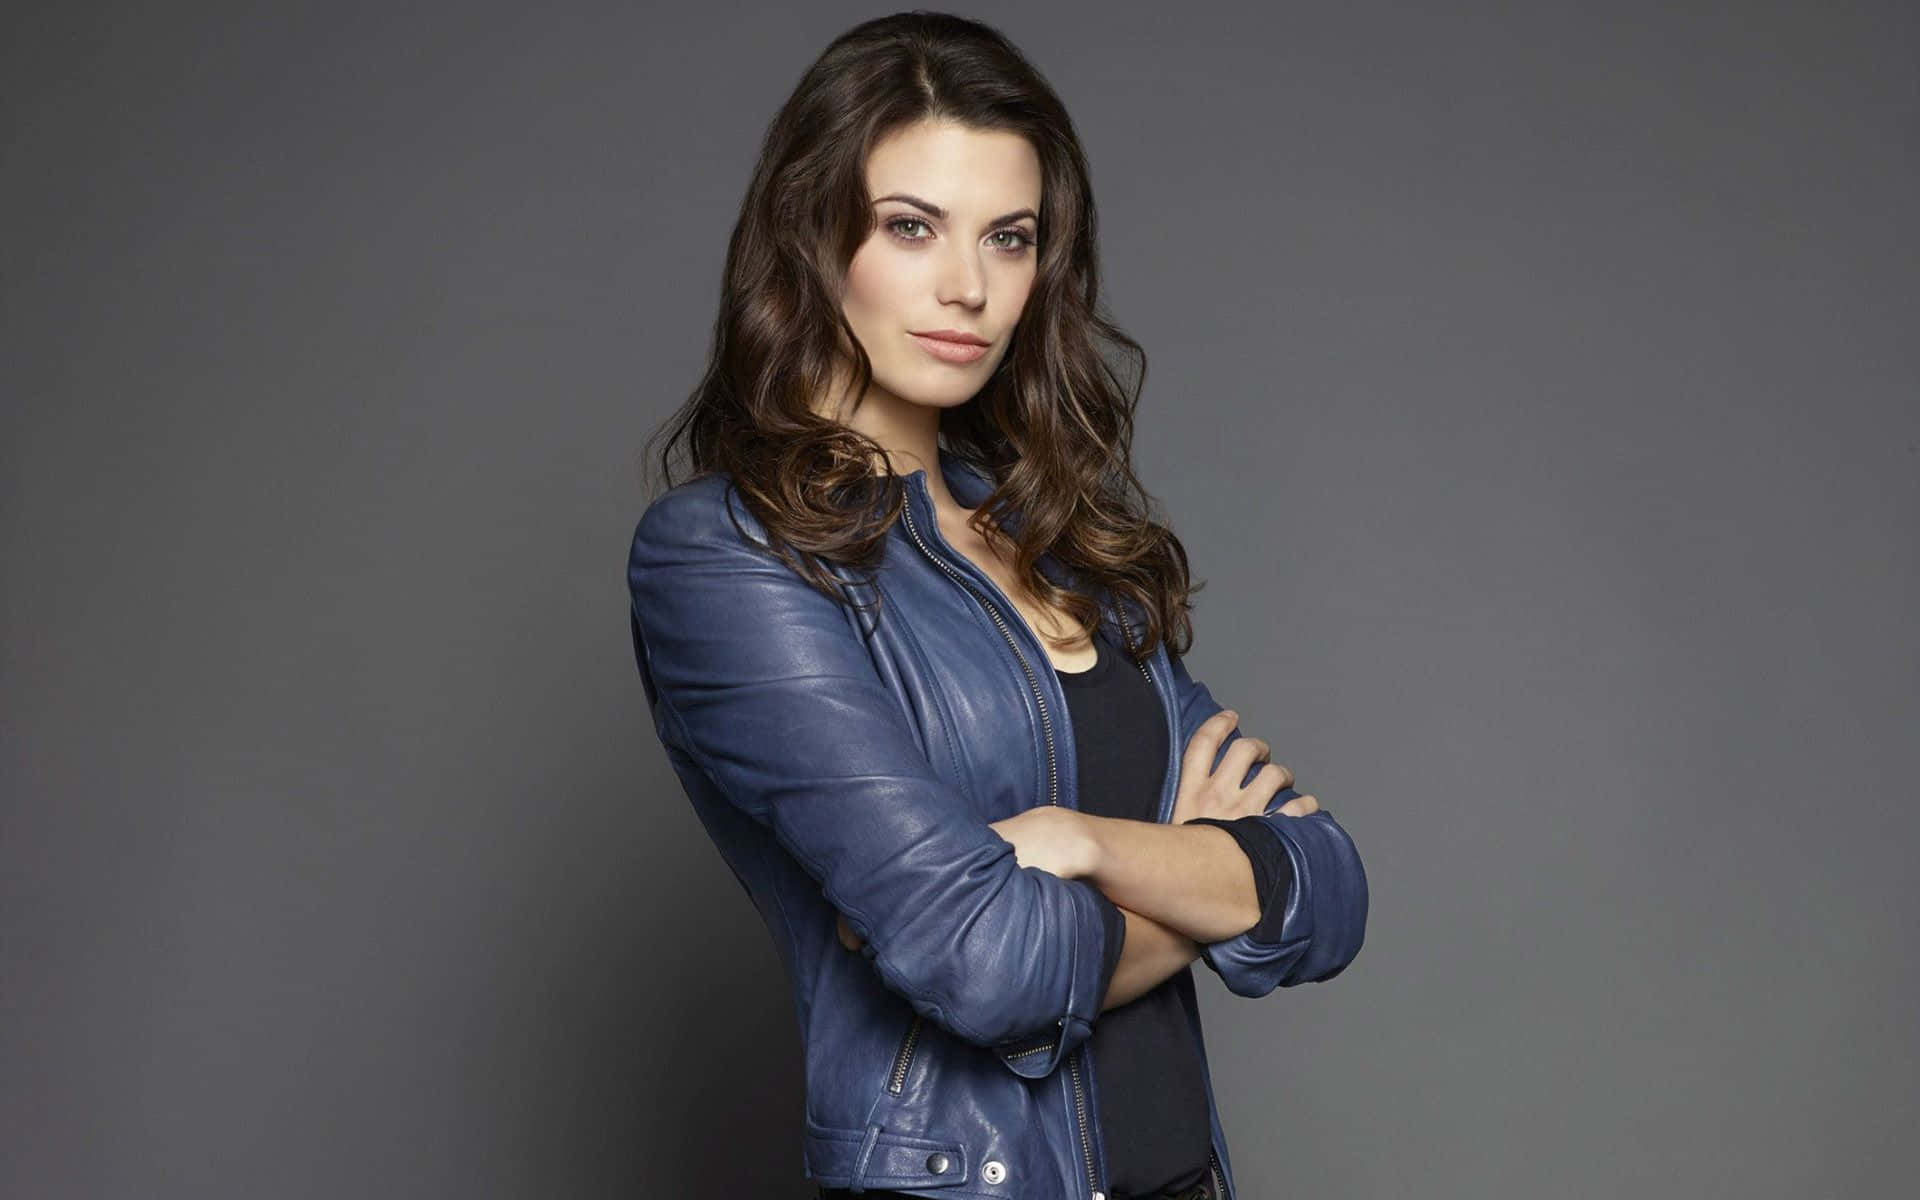 Meghan Ory Confident Pose Wallpaper